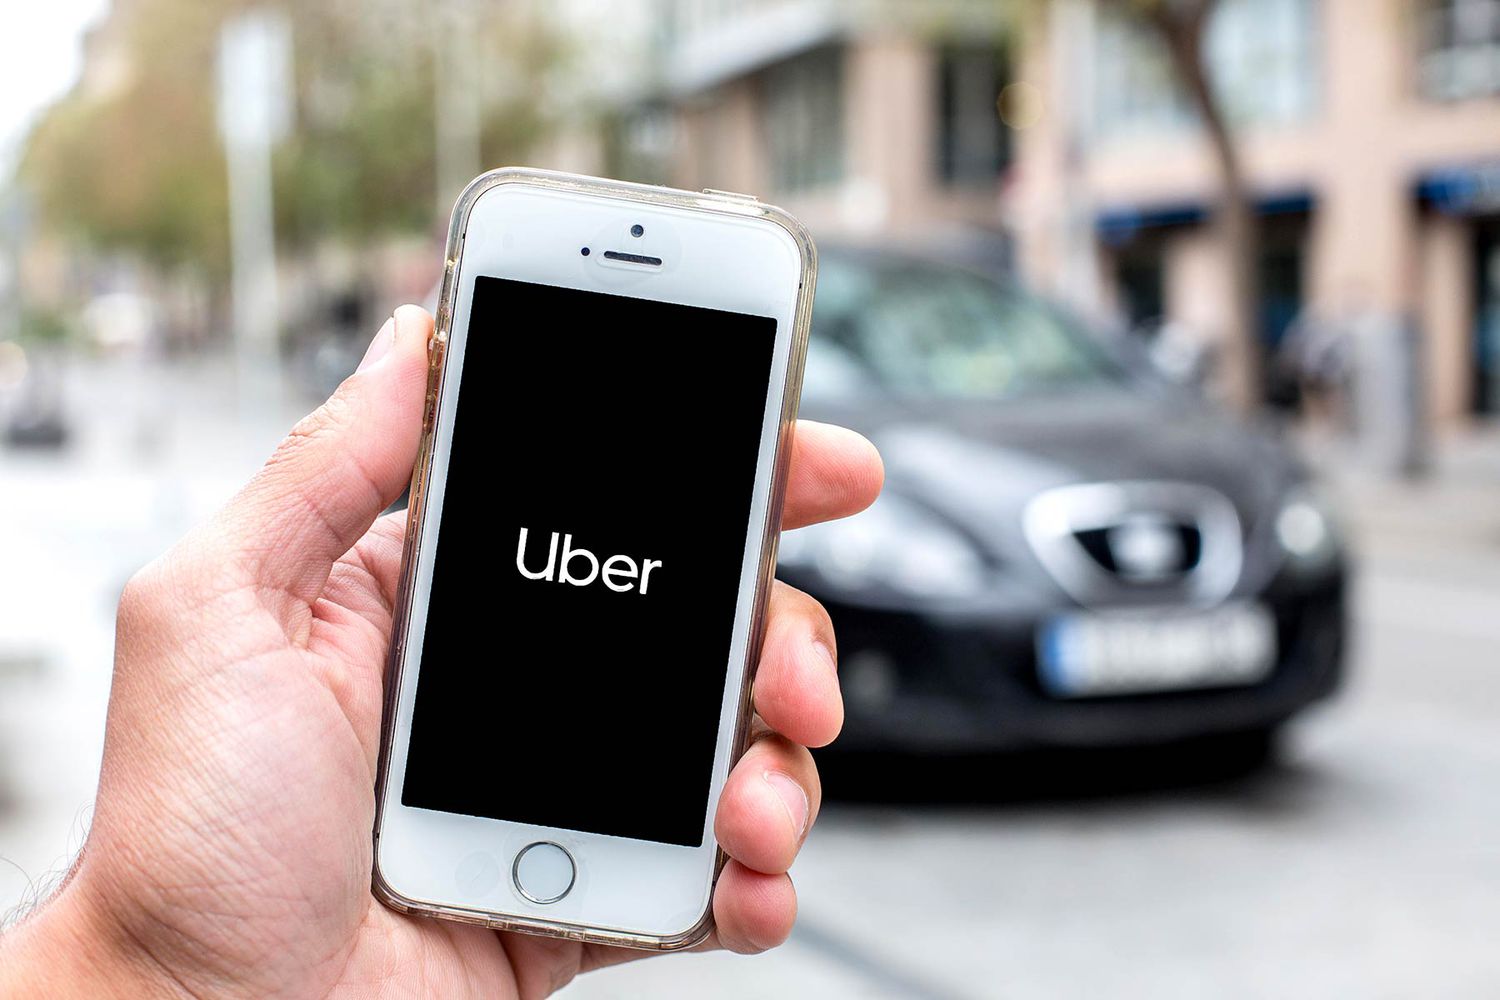 Uber Reports Impressive Profitability Gains In Q3, But Slower Growth Overshadows